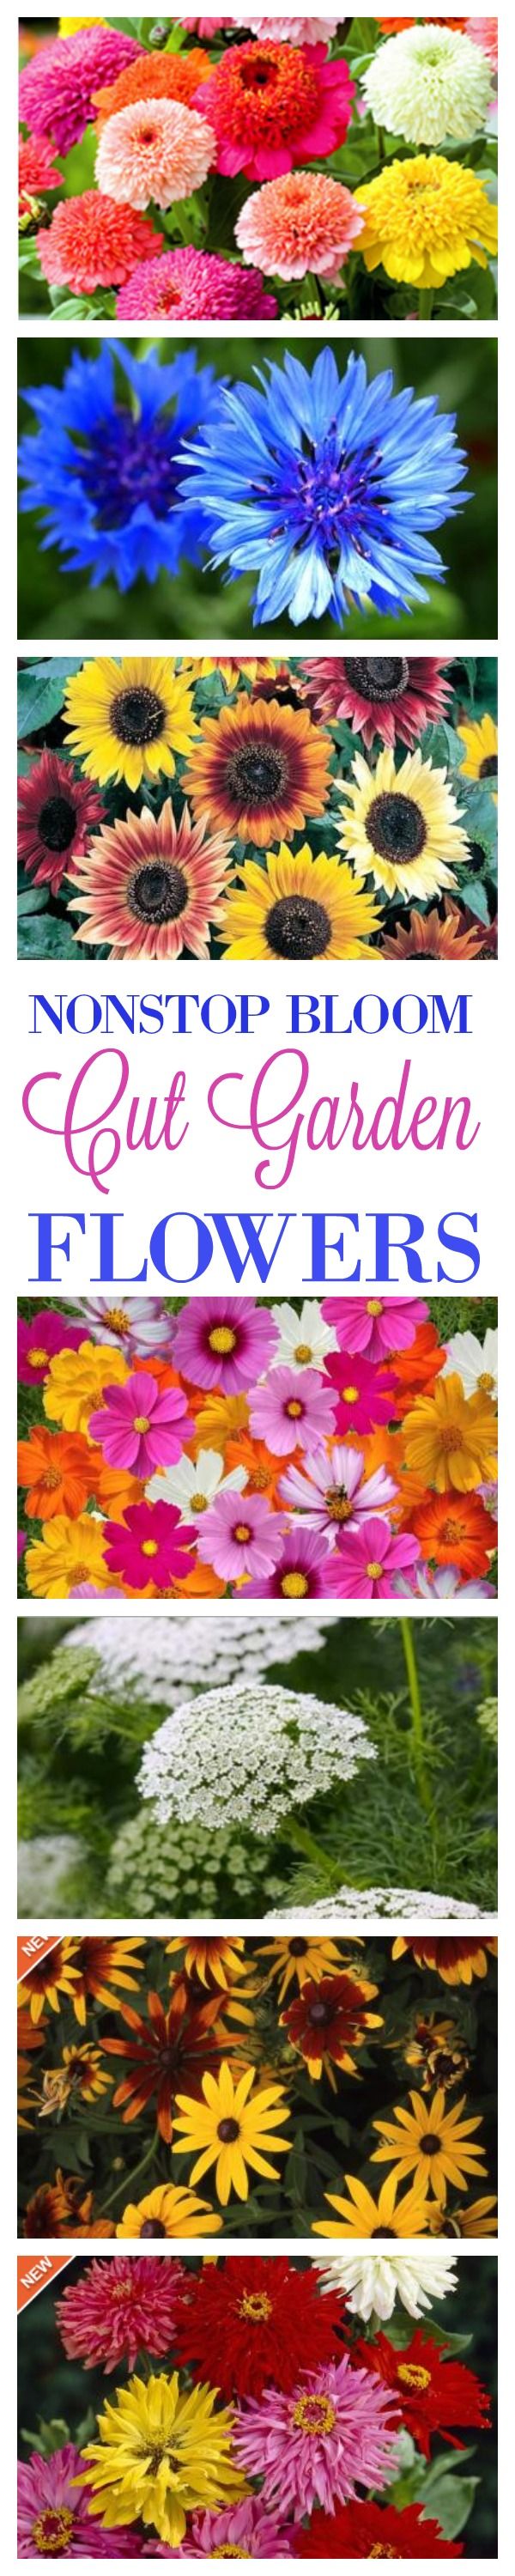 The Flower Seeds You'll Need To Buy For A Cut Flower Garden That Has Magnifi...